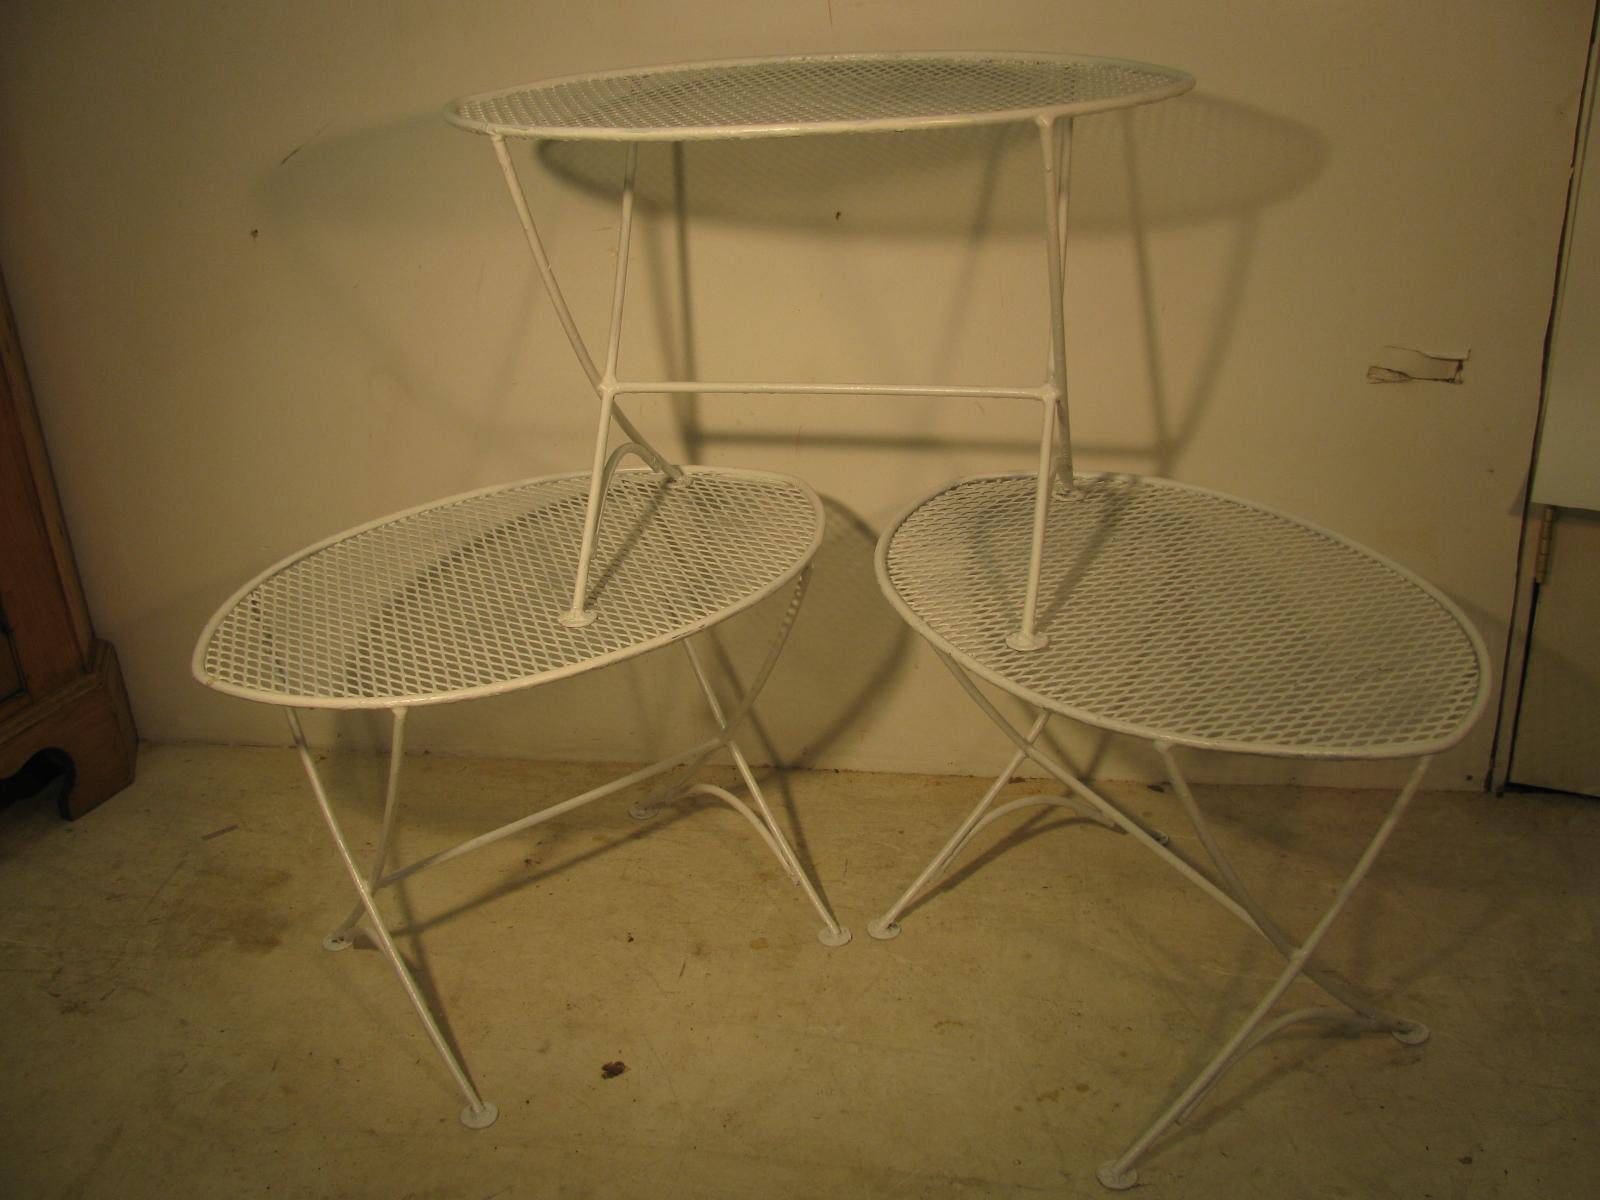 Set of 3 stylized oval side tables by Maurizio Tempestini for John Salterini. Curved legs with ample space for your drink and food plate. Just recently painted white. See the other pieces from this set in other listings. Set of six chairs with